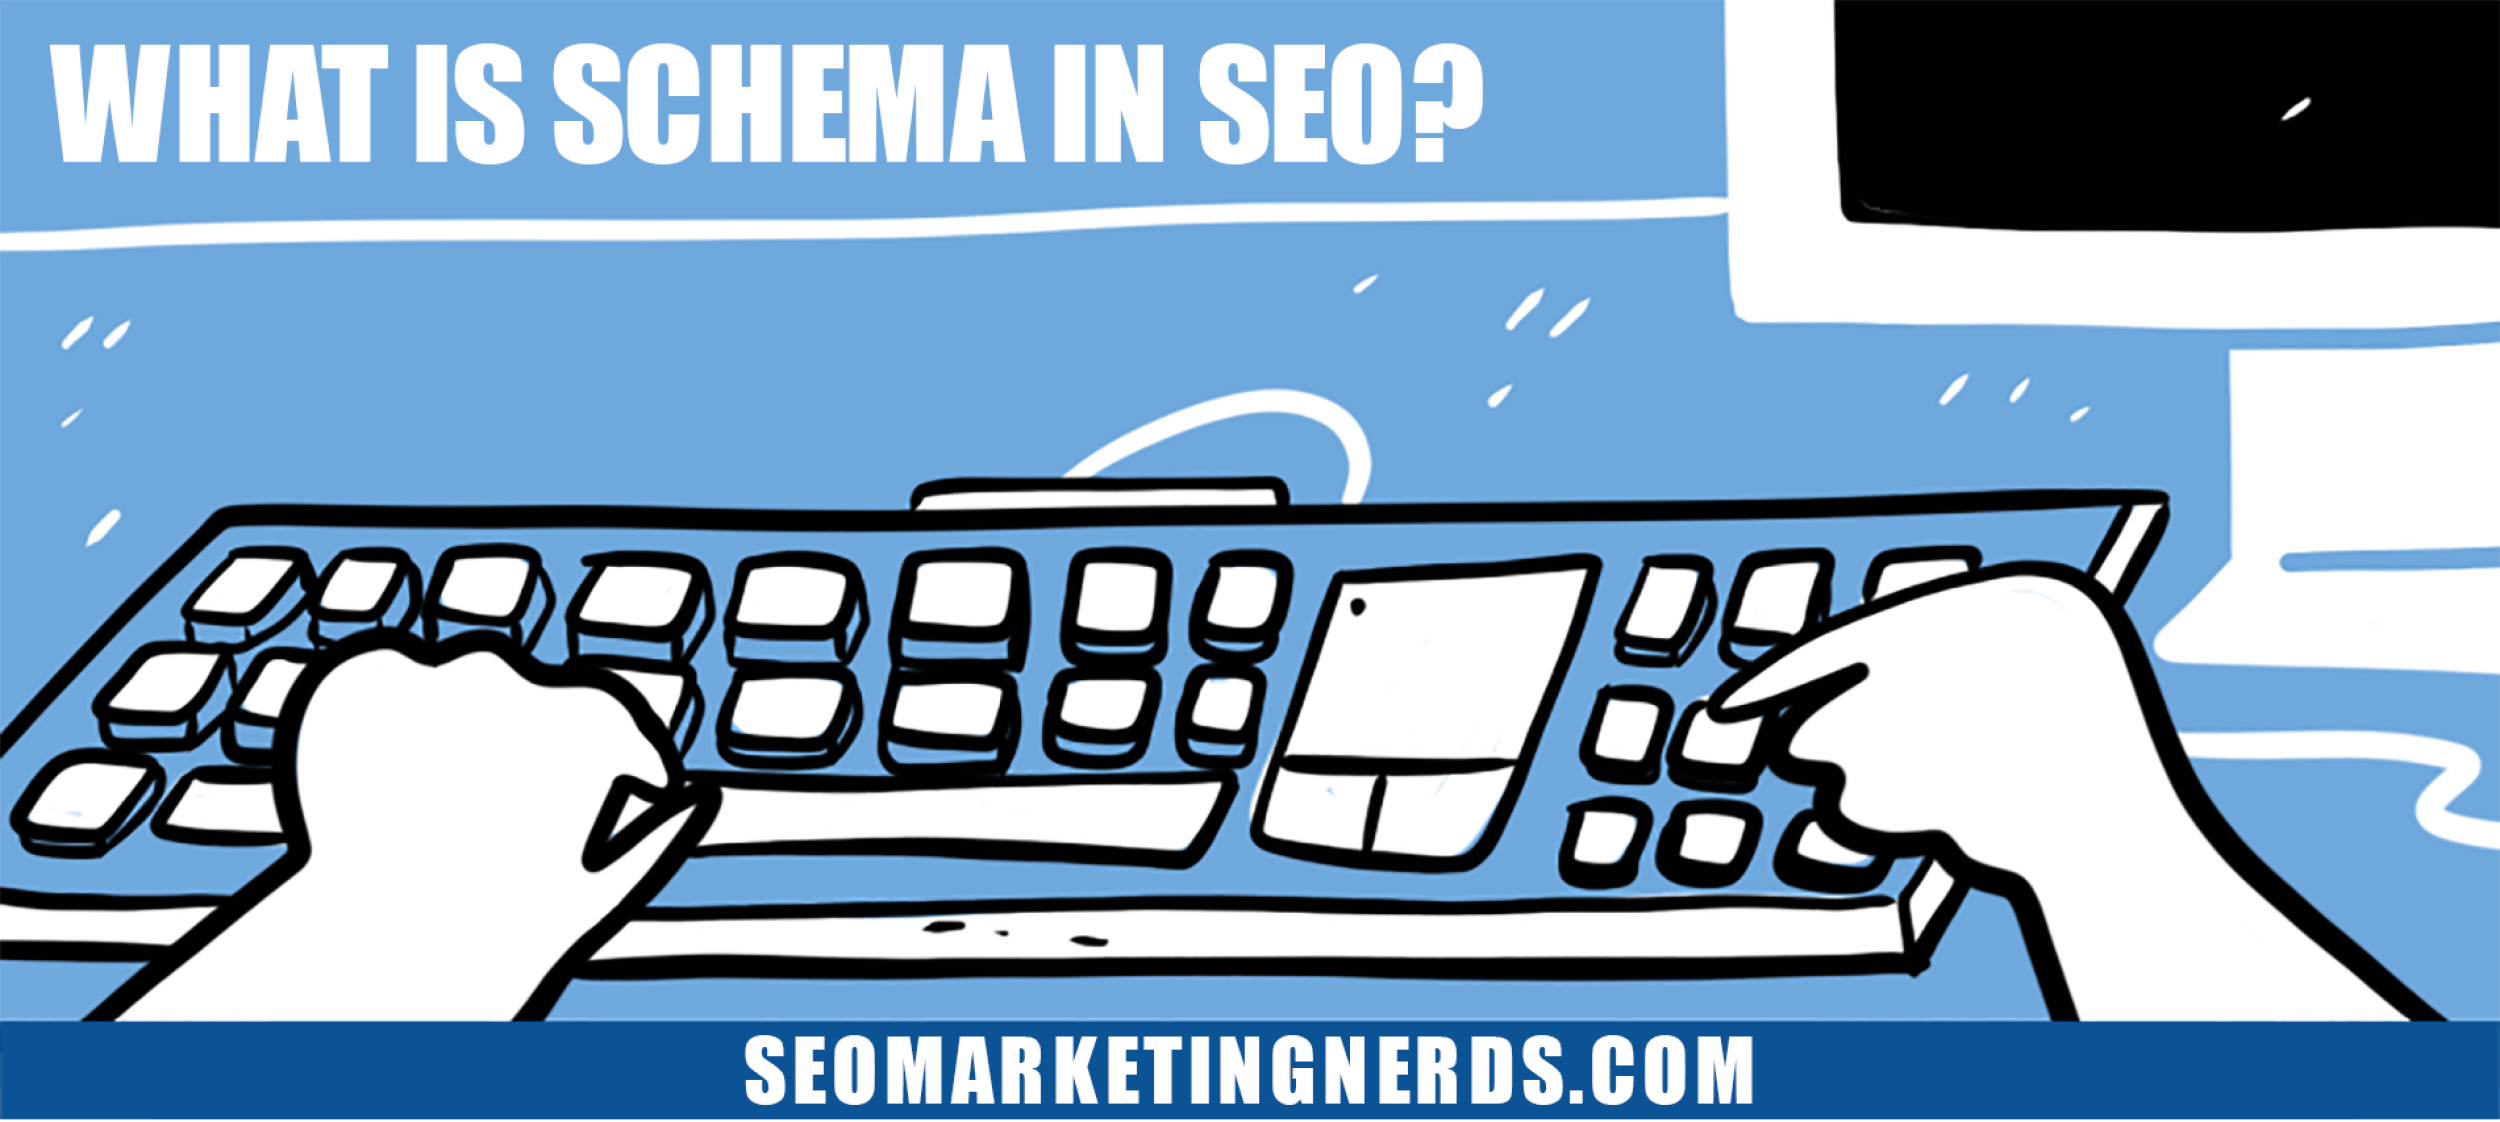 What is Schema in SEO?